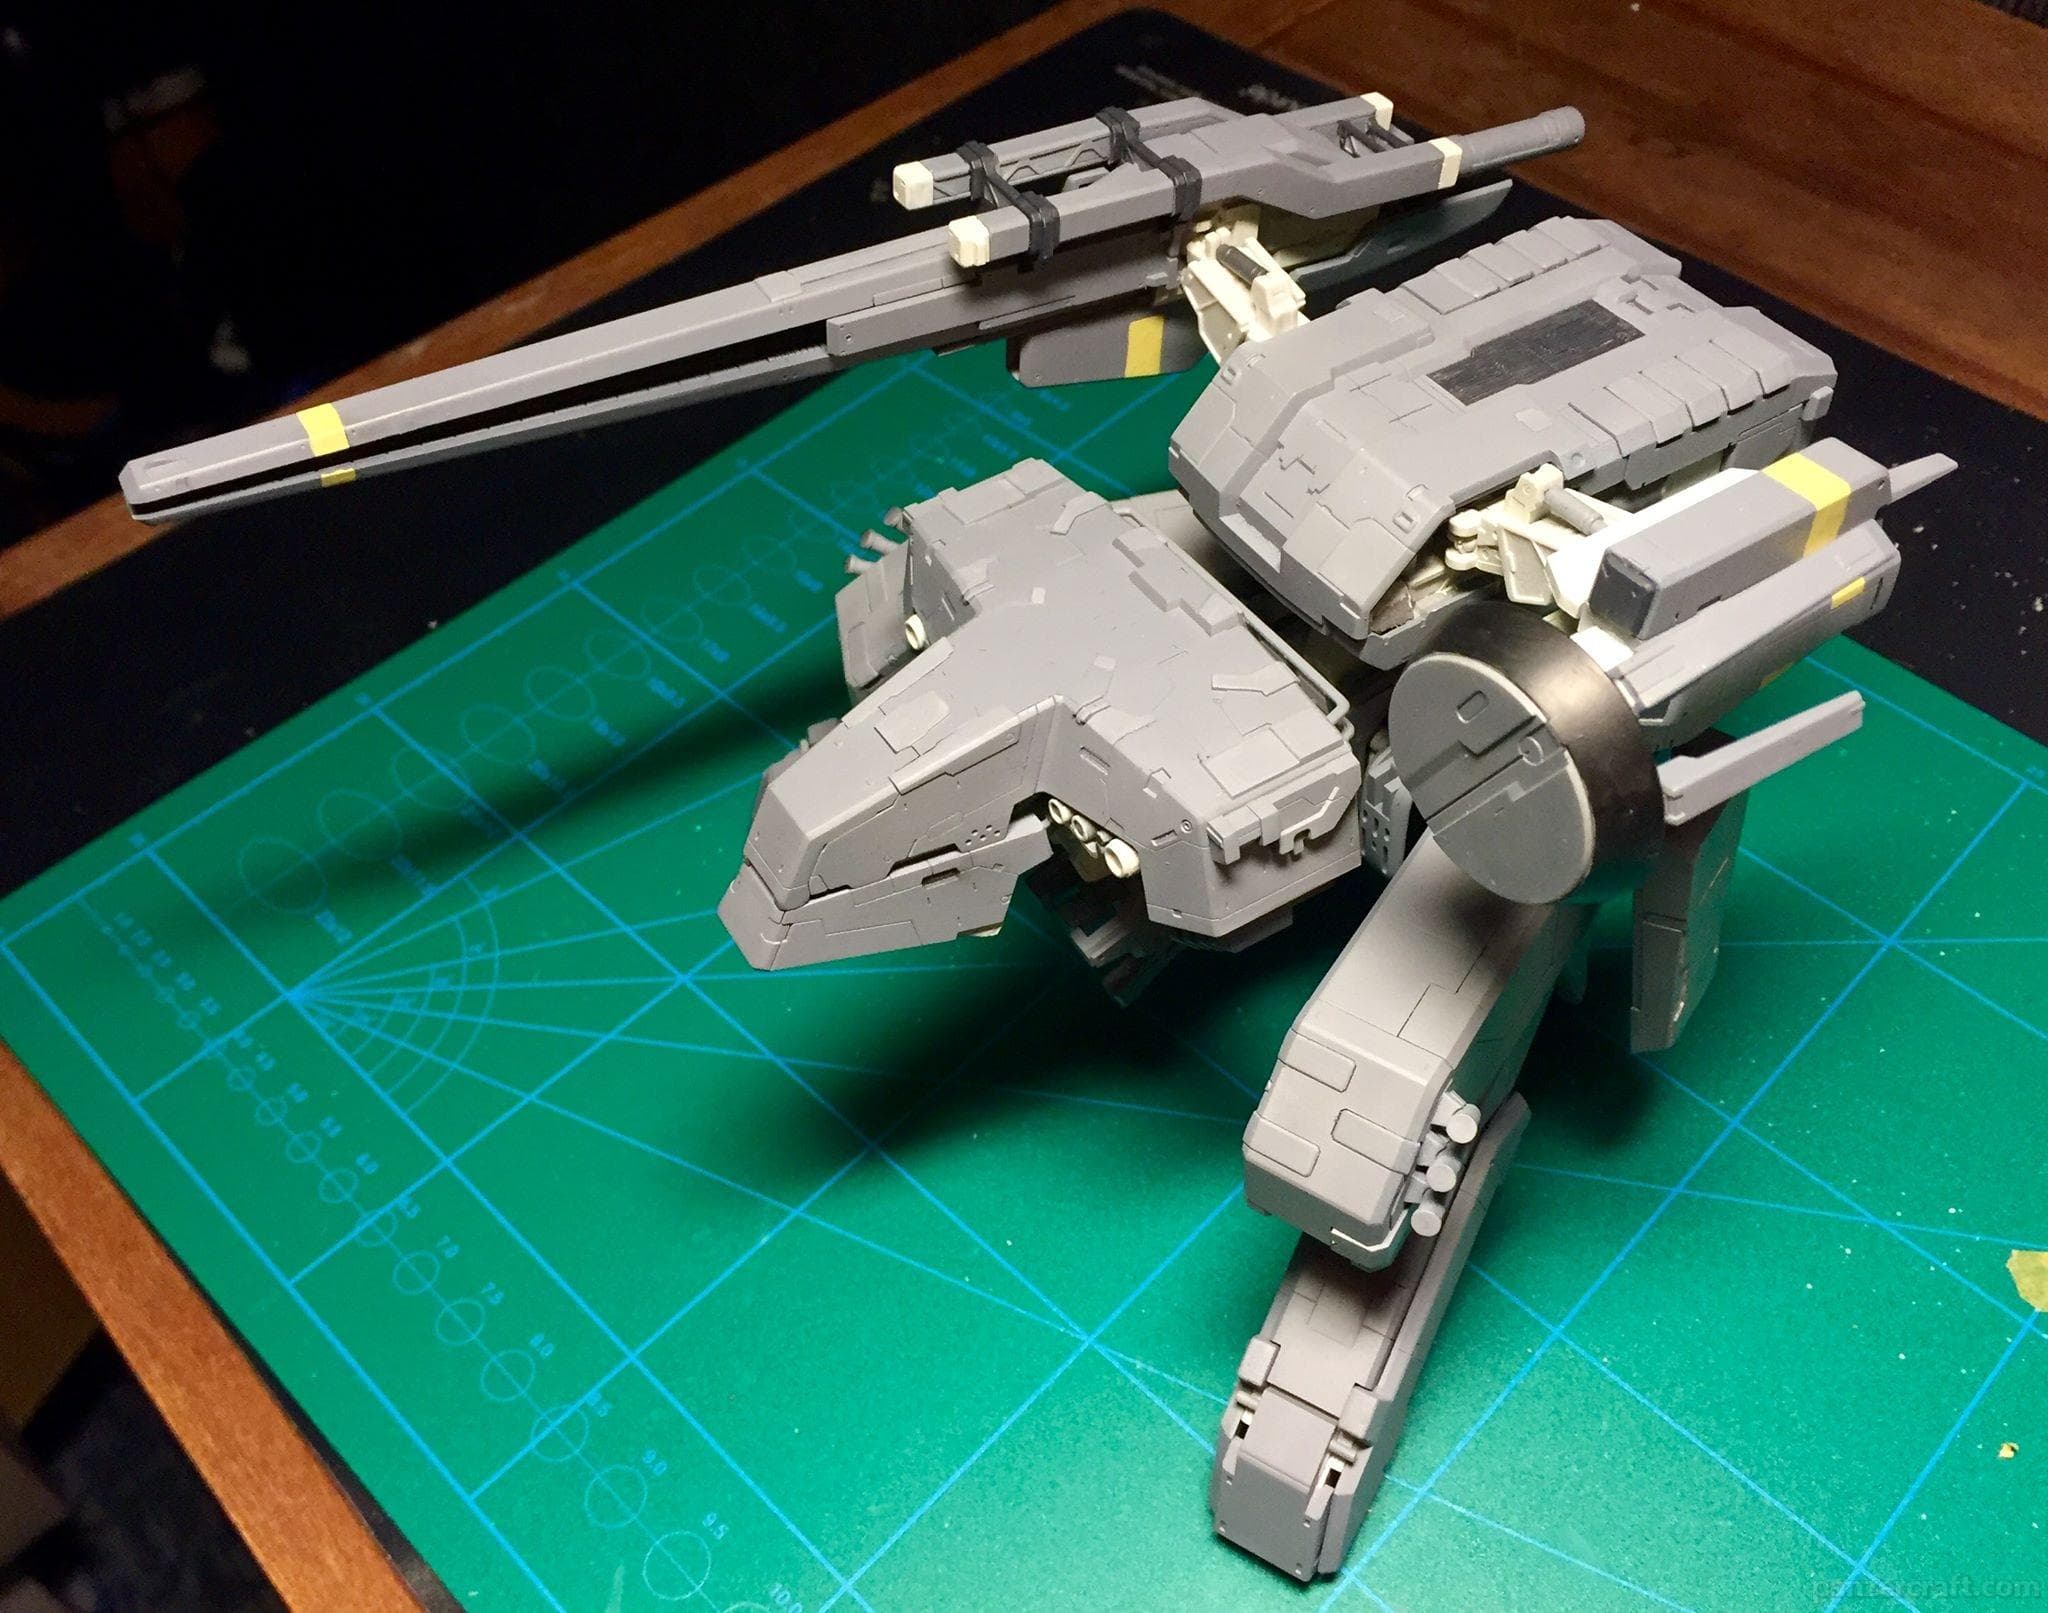 Metal Gear Rex (9) - Gray color airbrushed